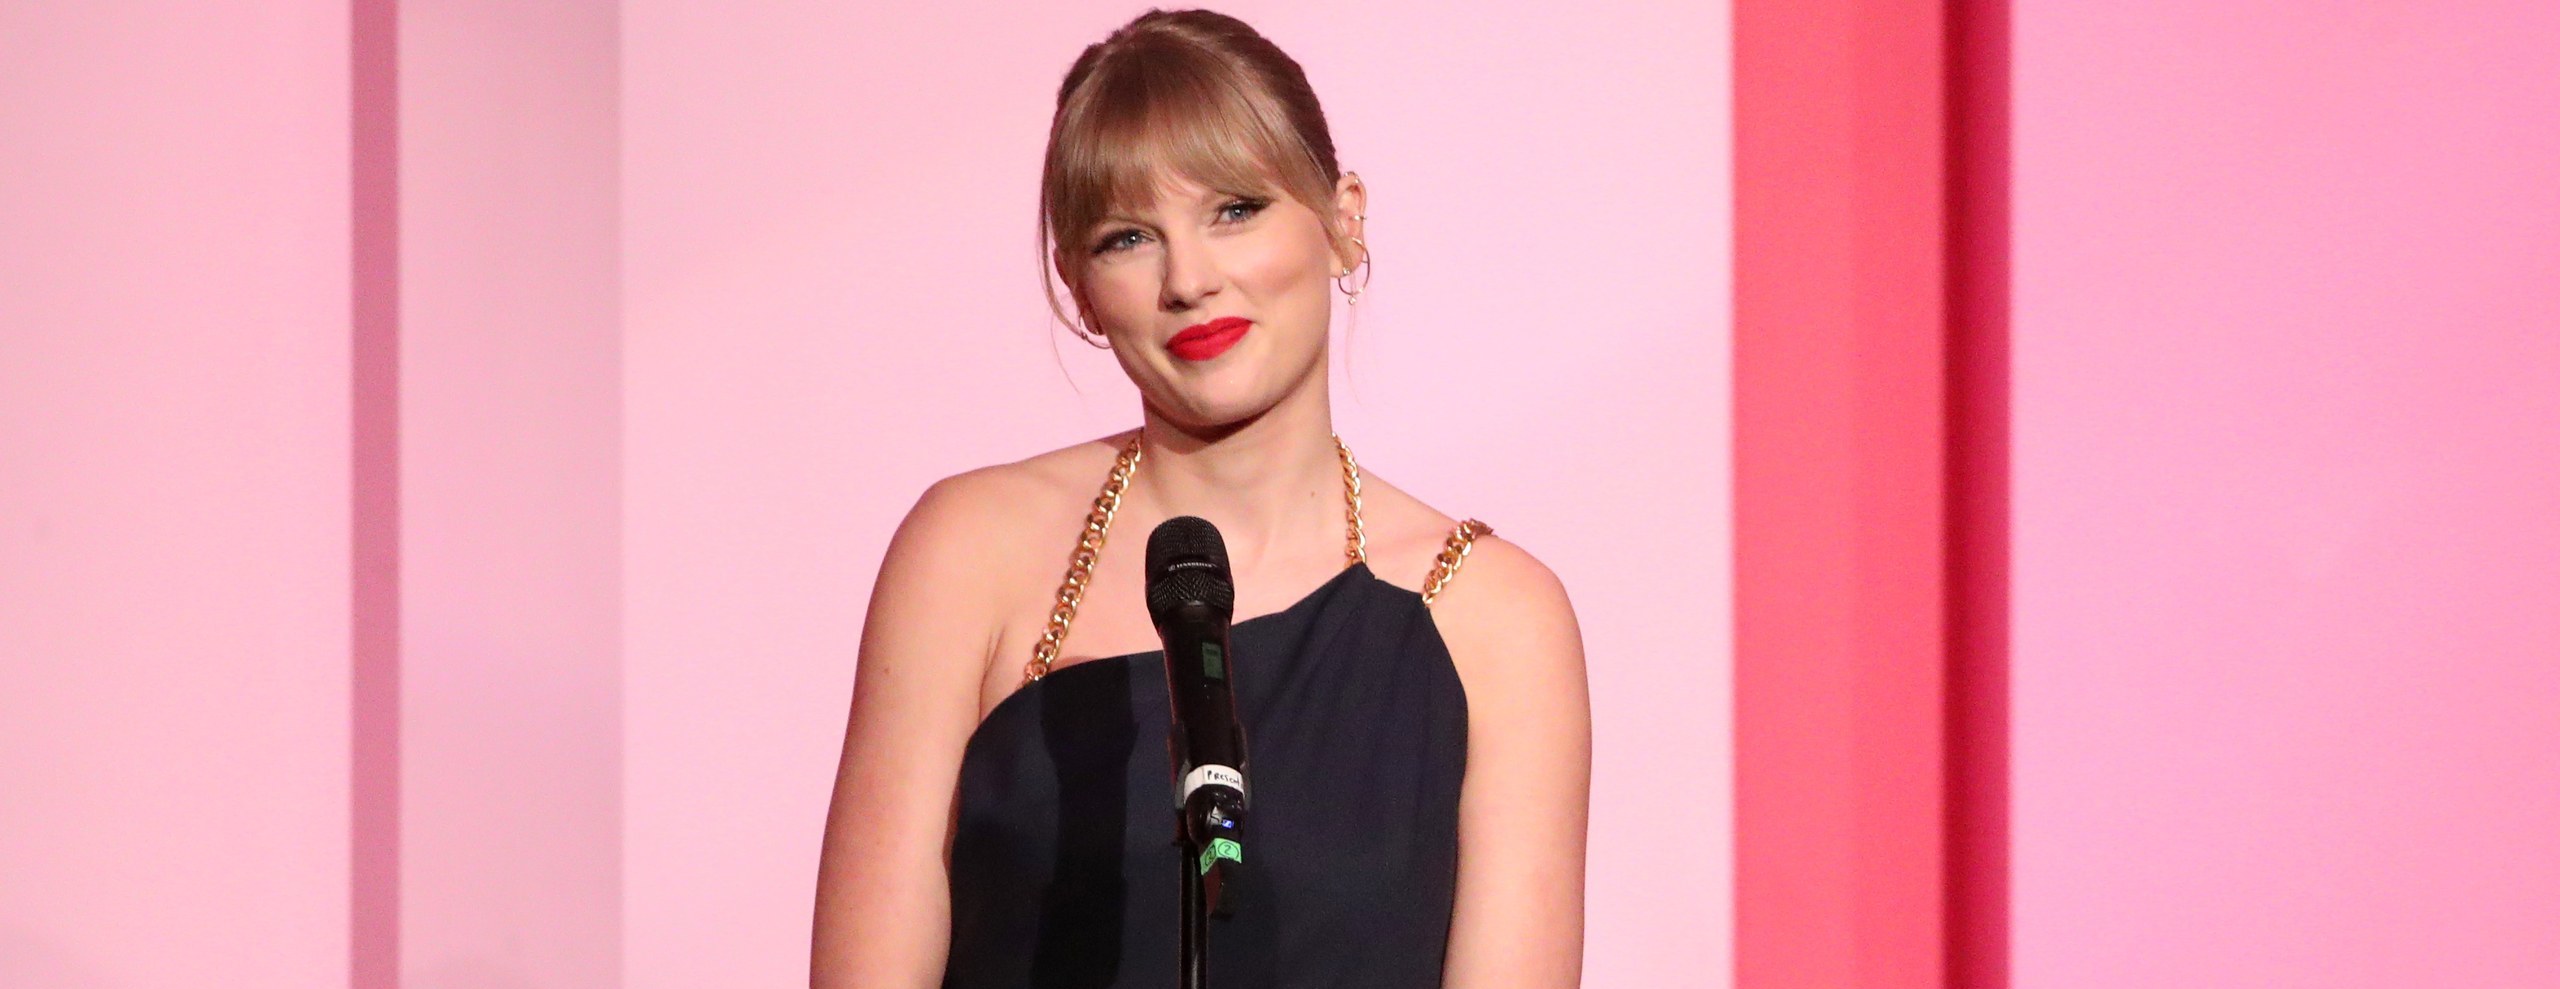 Taylor Swift Opens Up About Experiencing an Eating Disorder in Netflix Documentary “Miss Americana”